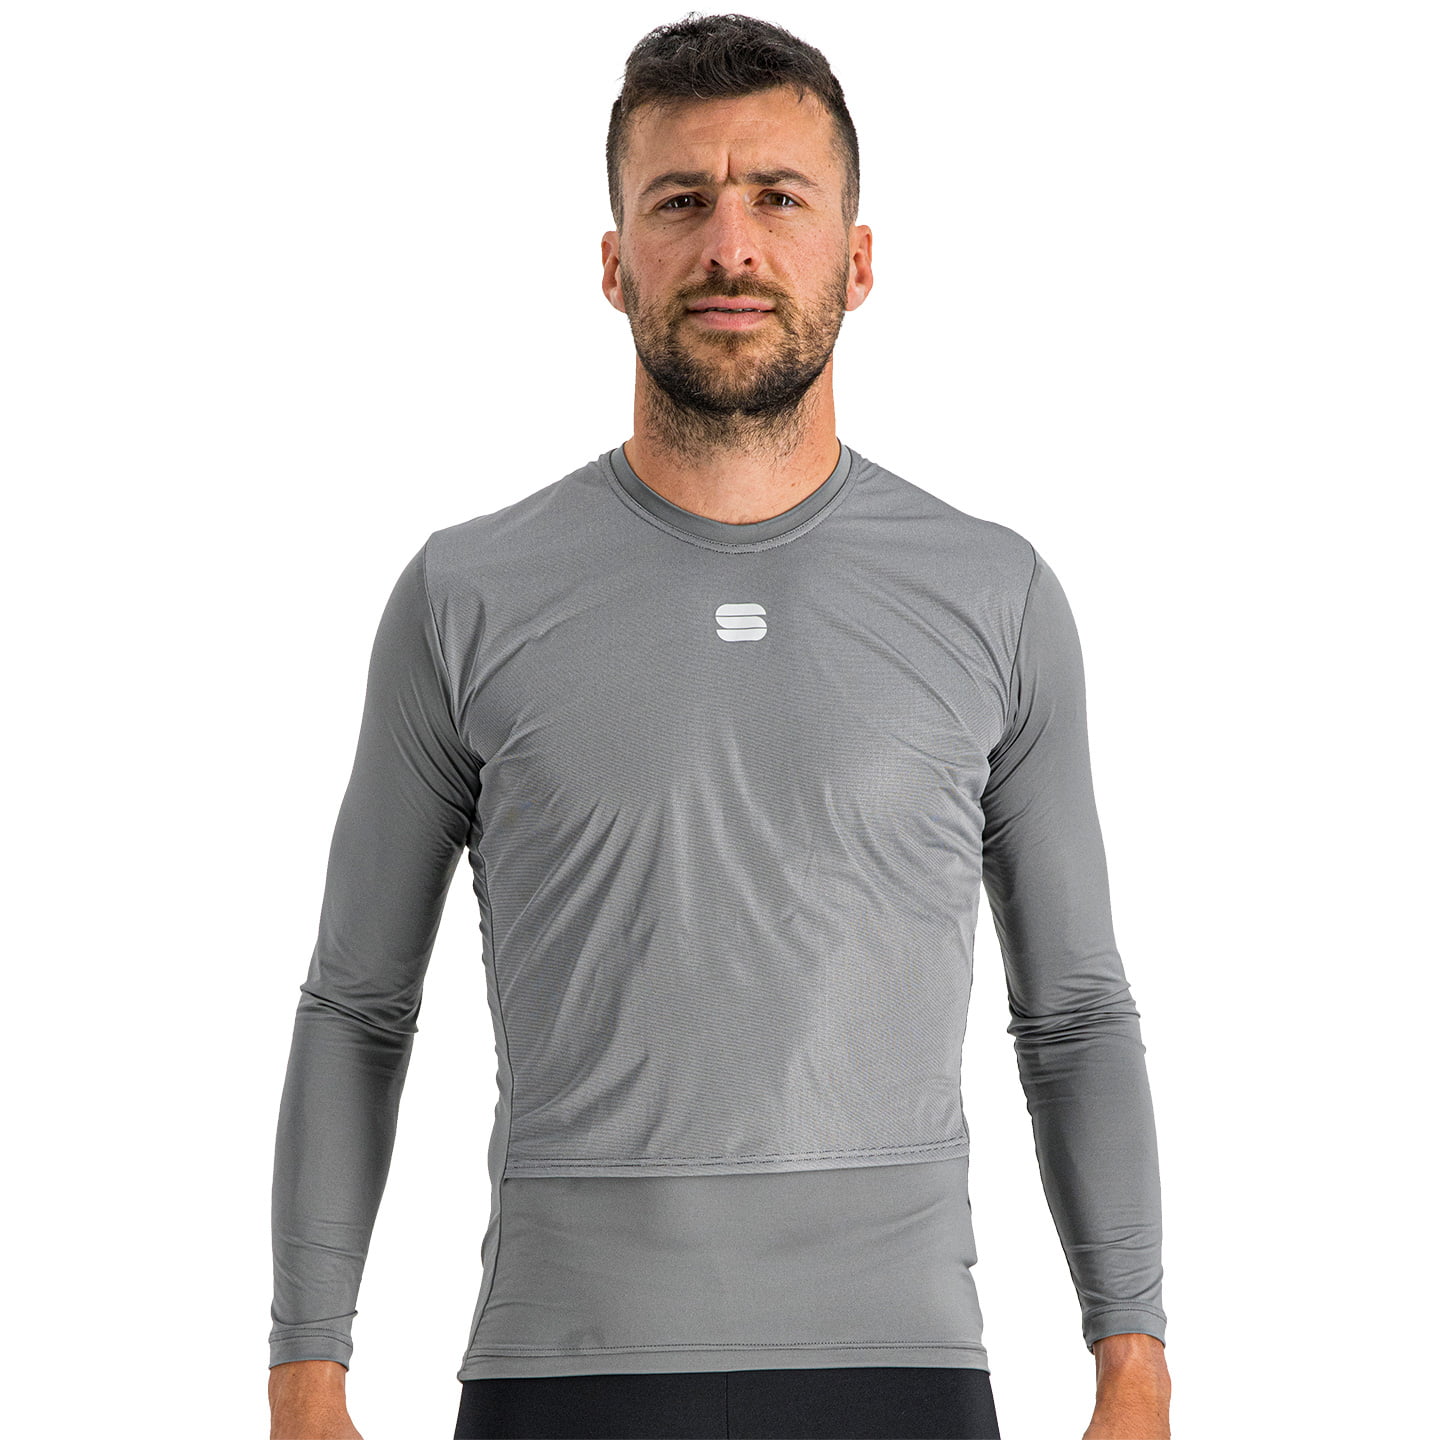 Sportful Fiandre Thermal Long Sleeve Cycling Base Layer Base Layer, for men, size 2XL, Singlet, Cycle gear